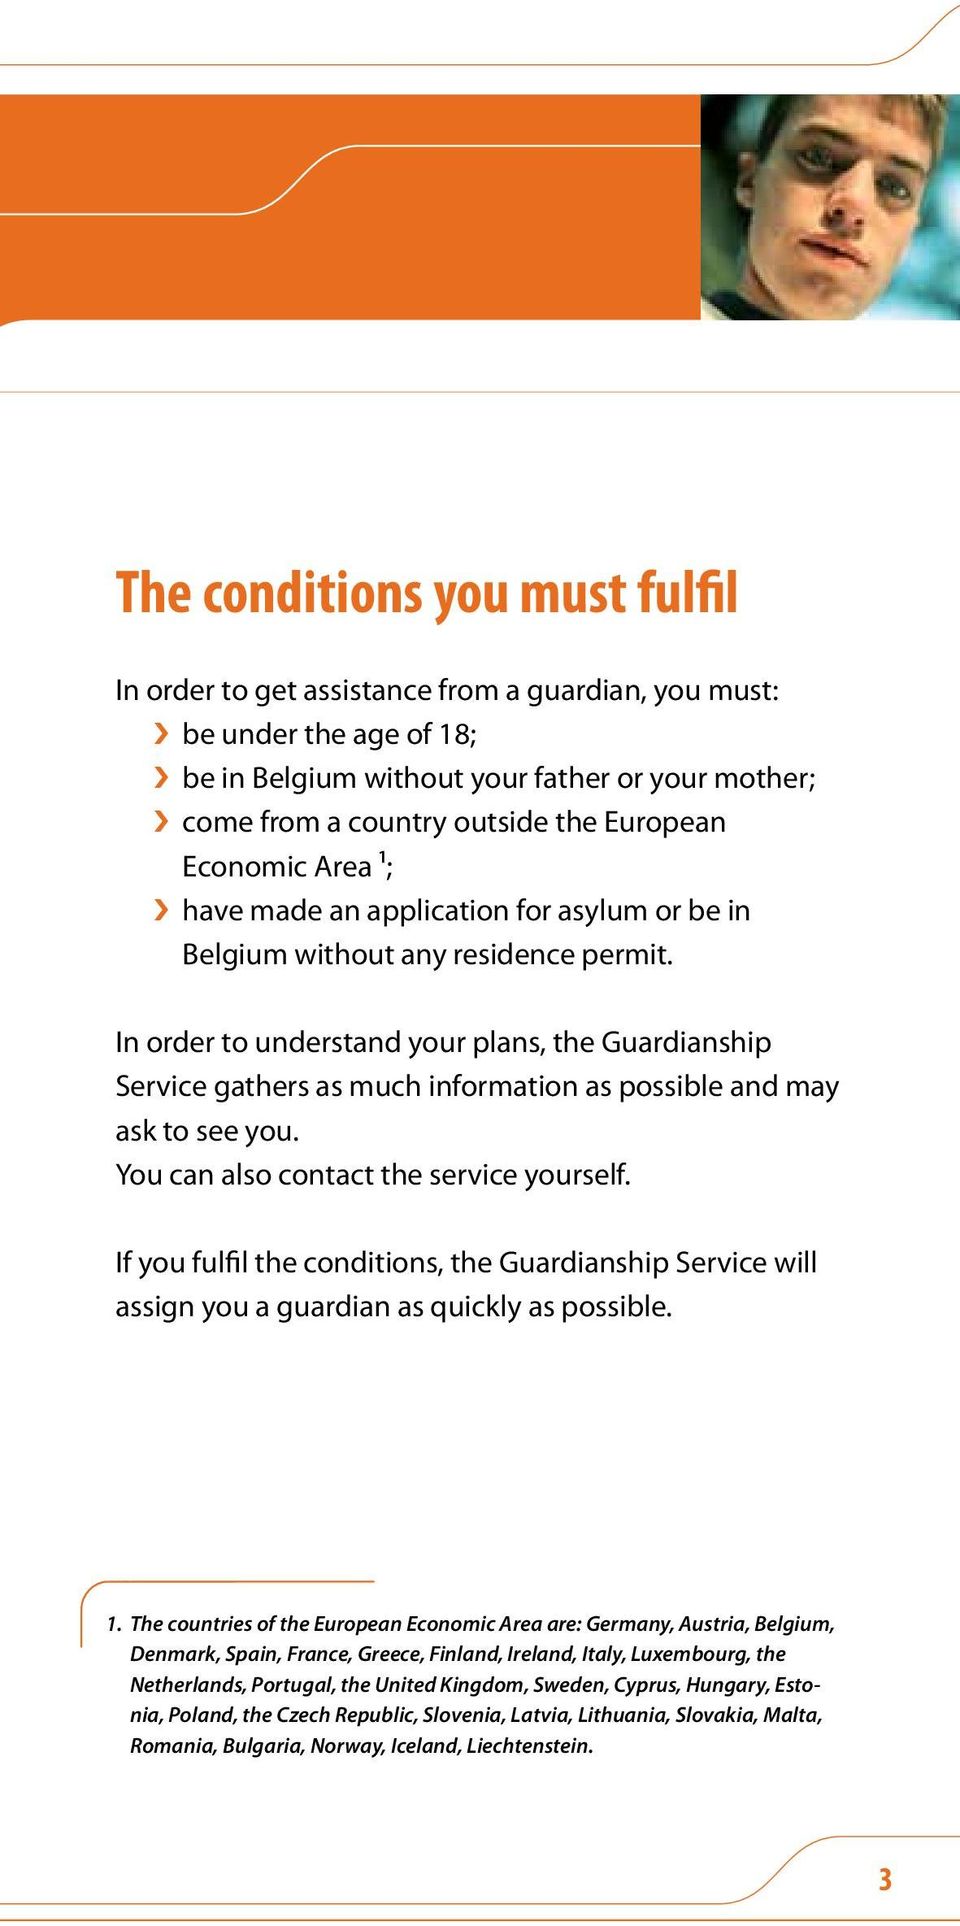 In order to understand your plans, the Guardianship Service gathers as much information as possible and may ask to see you. You can also contact the service yourself.